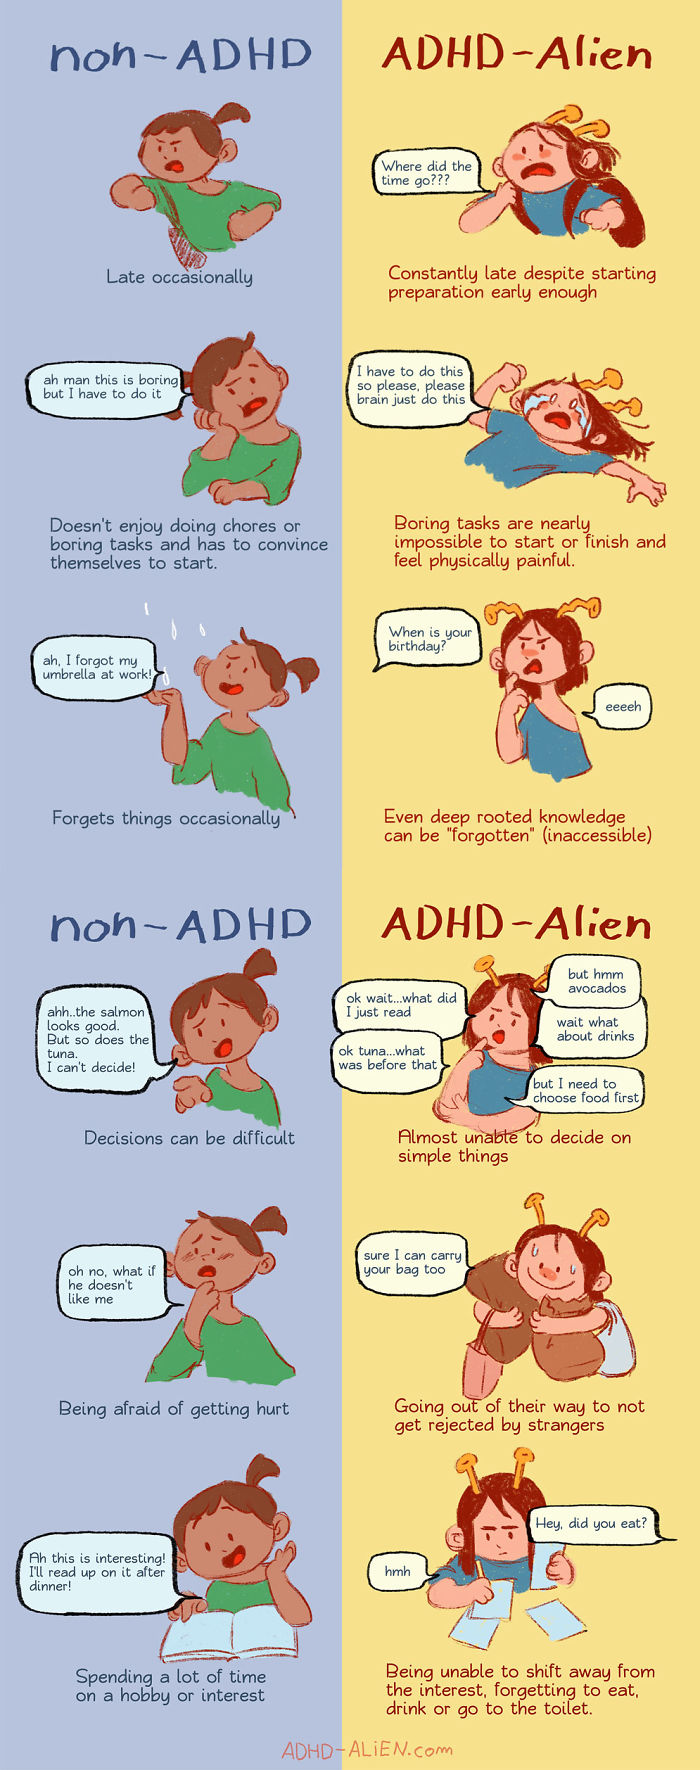 In relationships? get do bored men with adhd ADHD Complicates